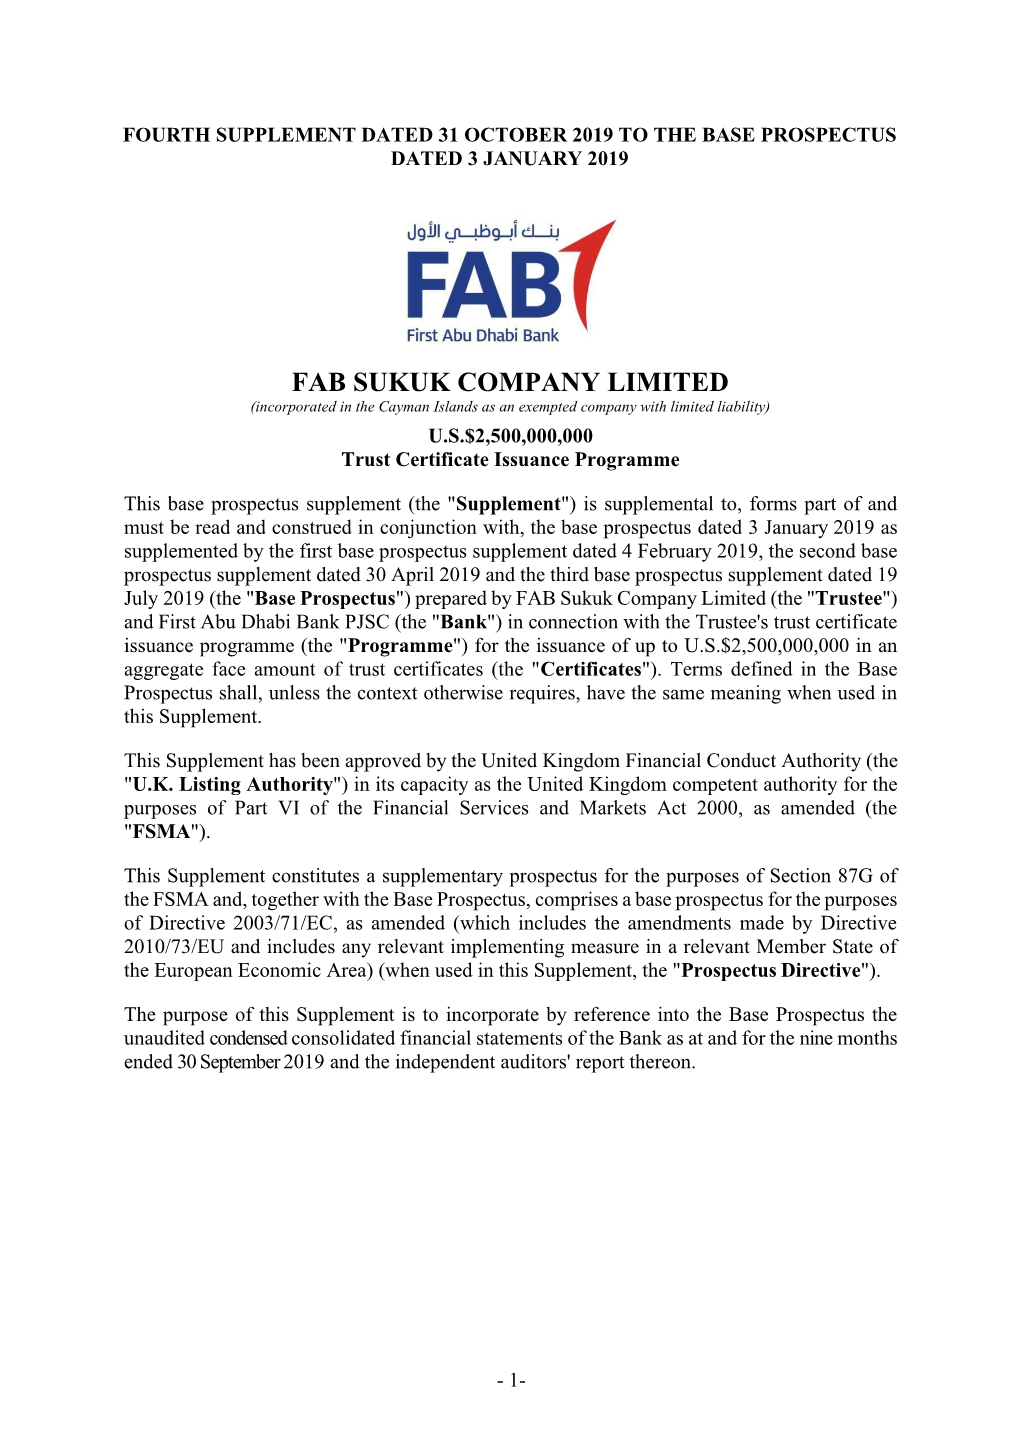 FAB SUKUK COMPANY LIMITED (Incorporated in the Cayman Islands As an Exempted Company with Limited Liability) U.S.$2,500,000,000 Trust Certificate Issuance Programme